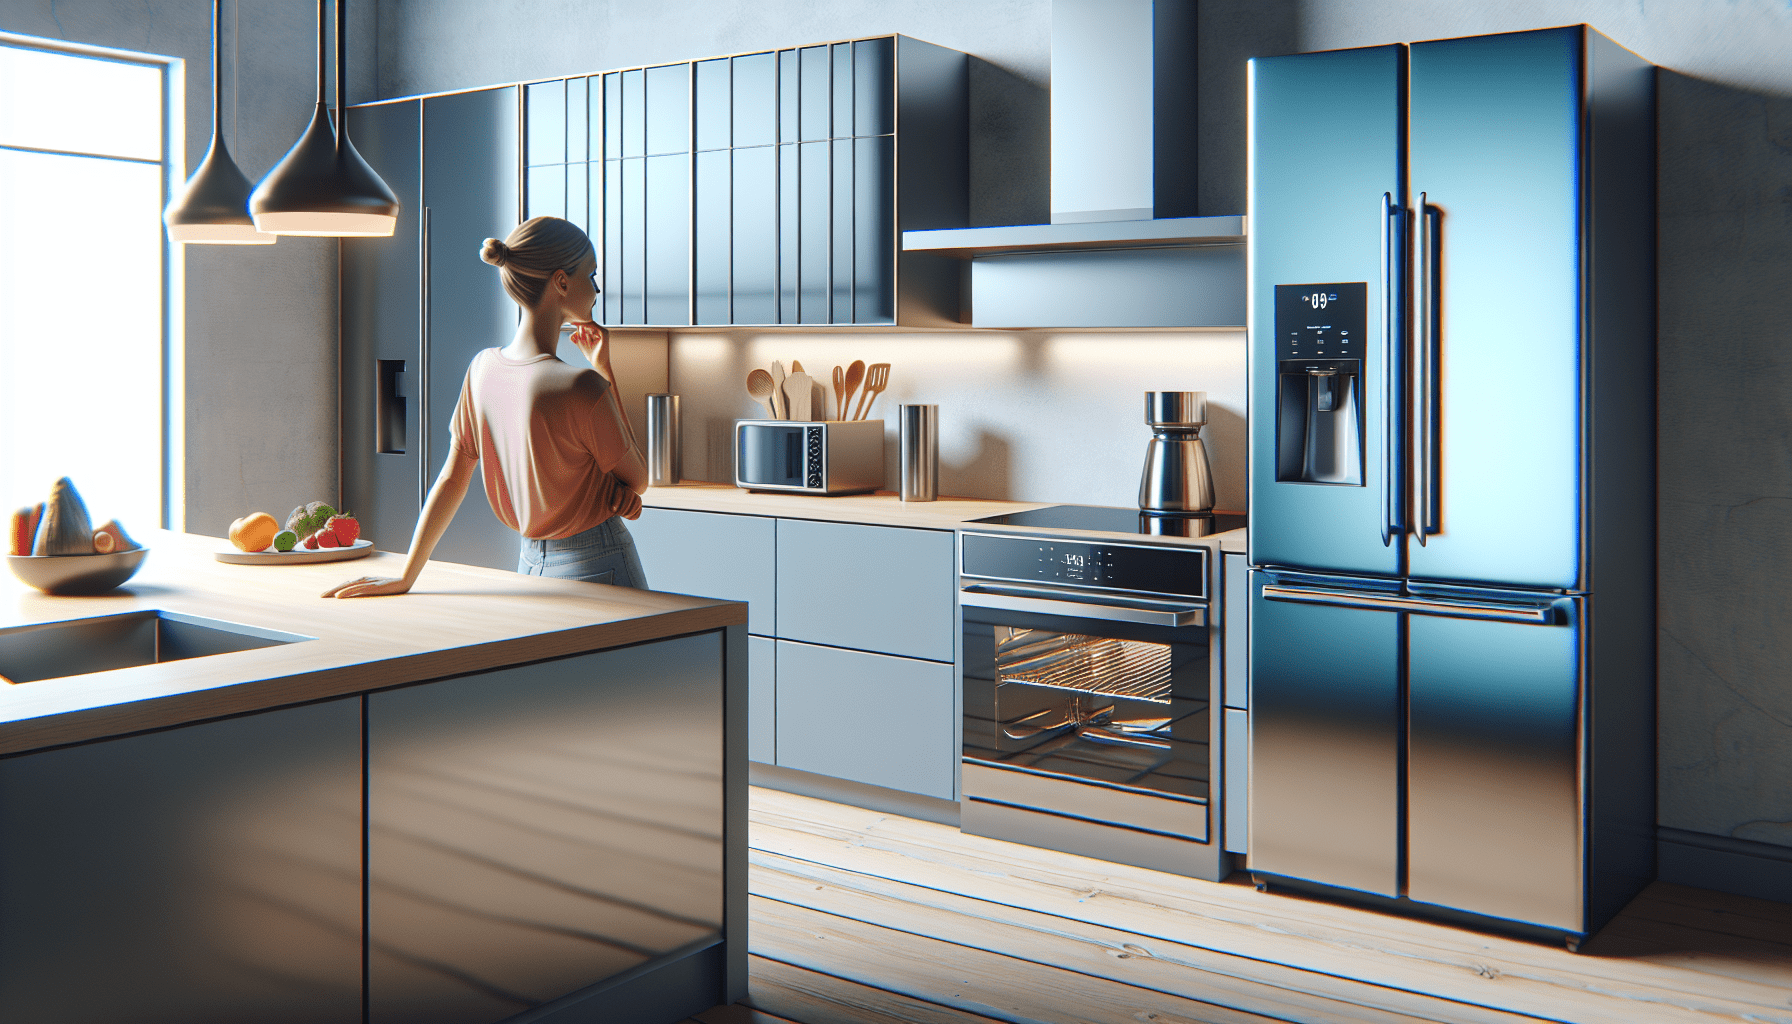 What Is The Newest Color For Kitchen Appliances?